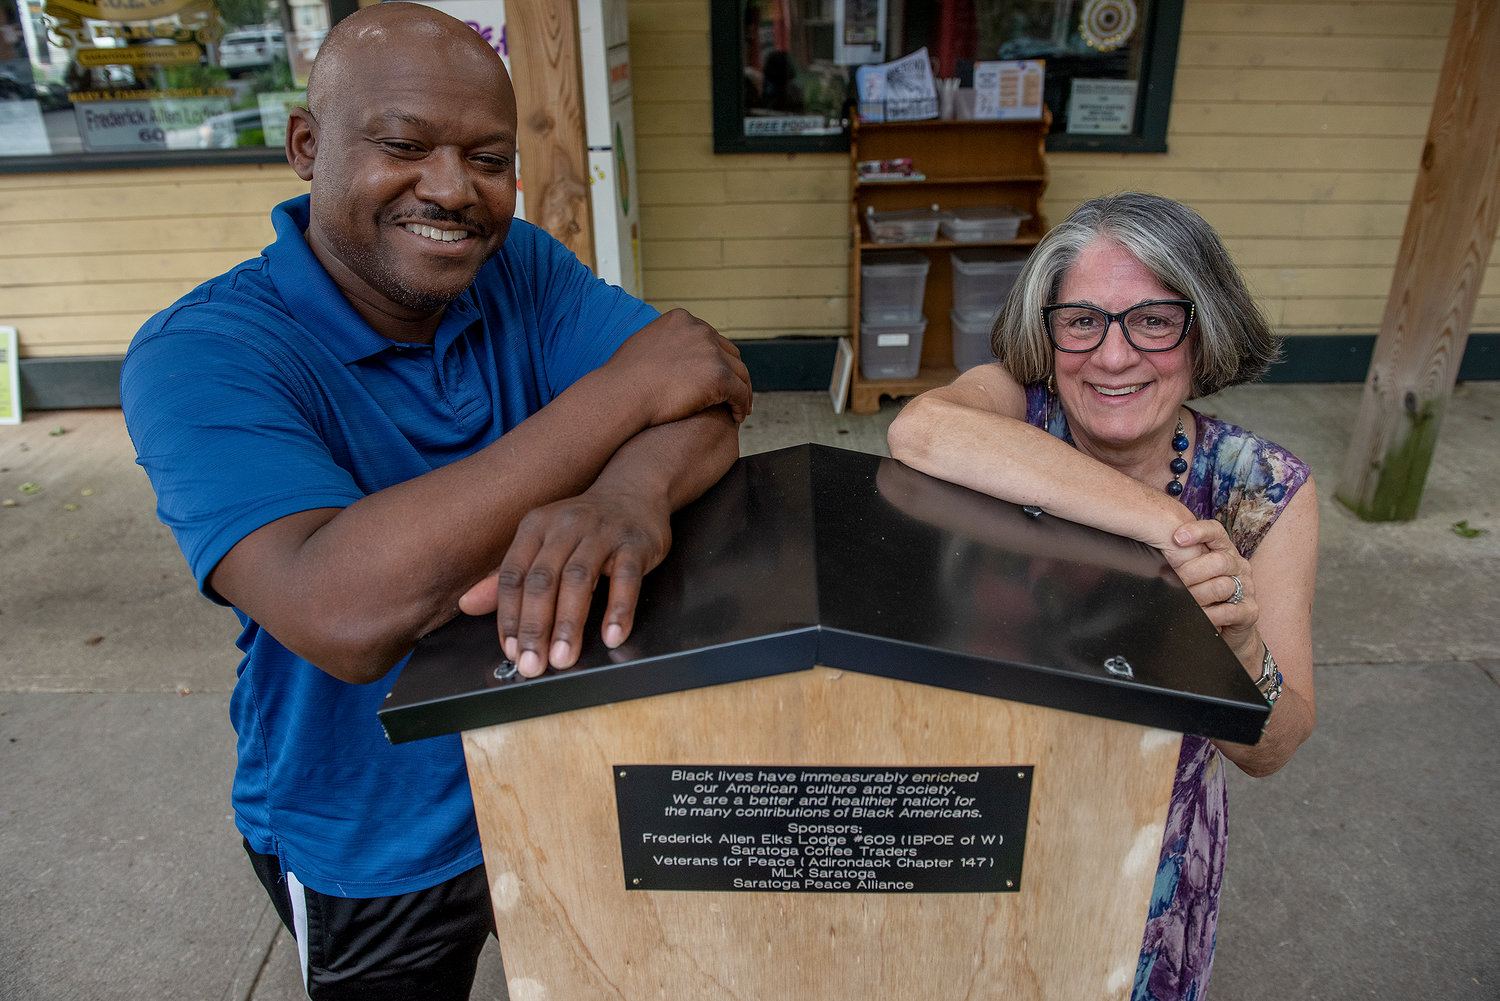 Frederick Allen Lodge Exalted Ruler Kendall Hicks and Associate member and Saratoga resident Linda LeTendre help display the first Little Free Library specializing in Black culture and history, outside Frederick Allen Lodge on Beekman Street in Saratoga Springs.